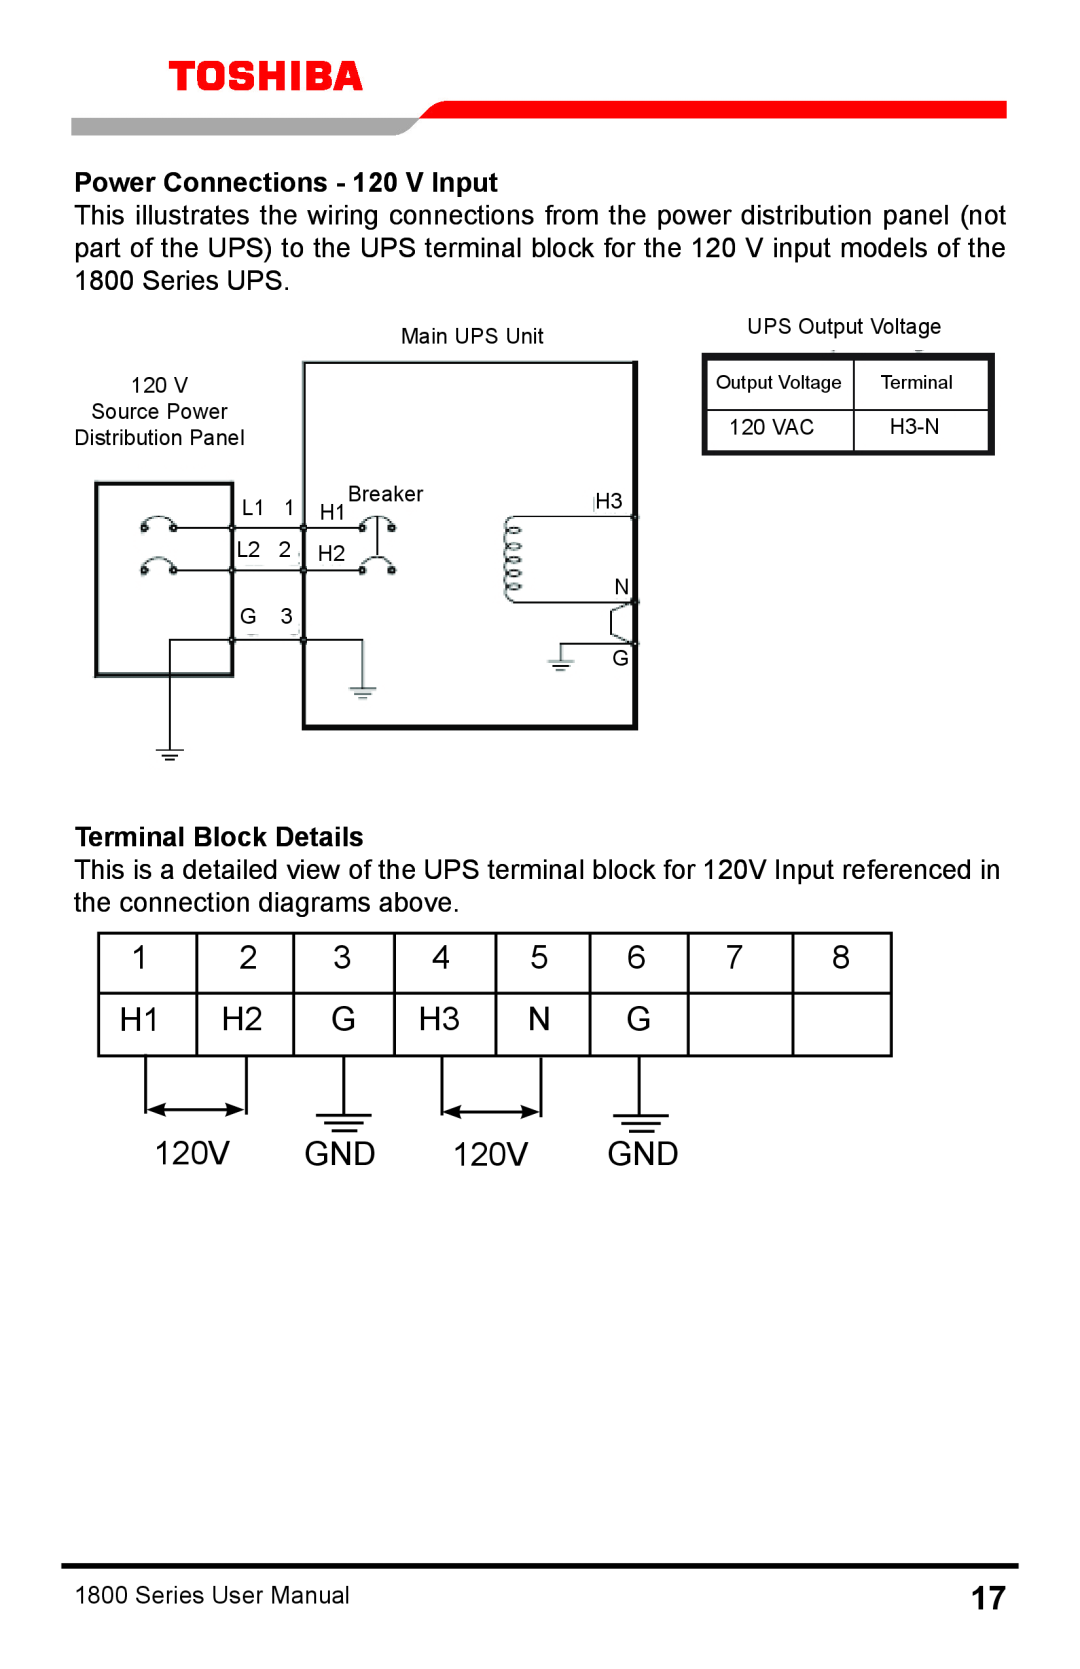 Toshiba 1800 manual Power Connections - 120 V Input, Terminal Block Details 